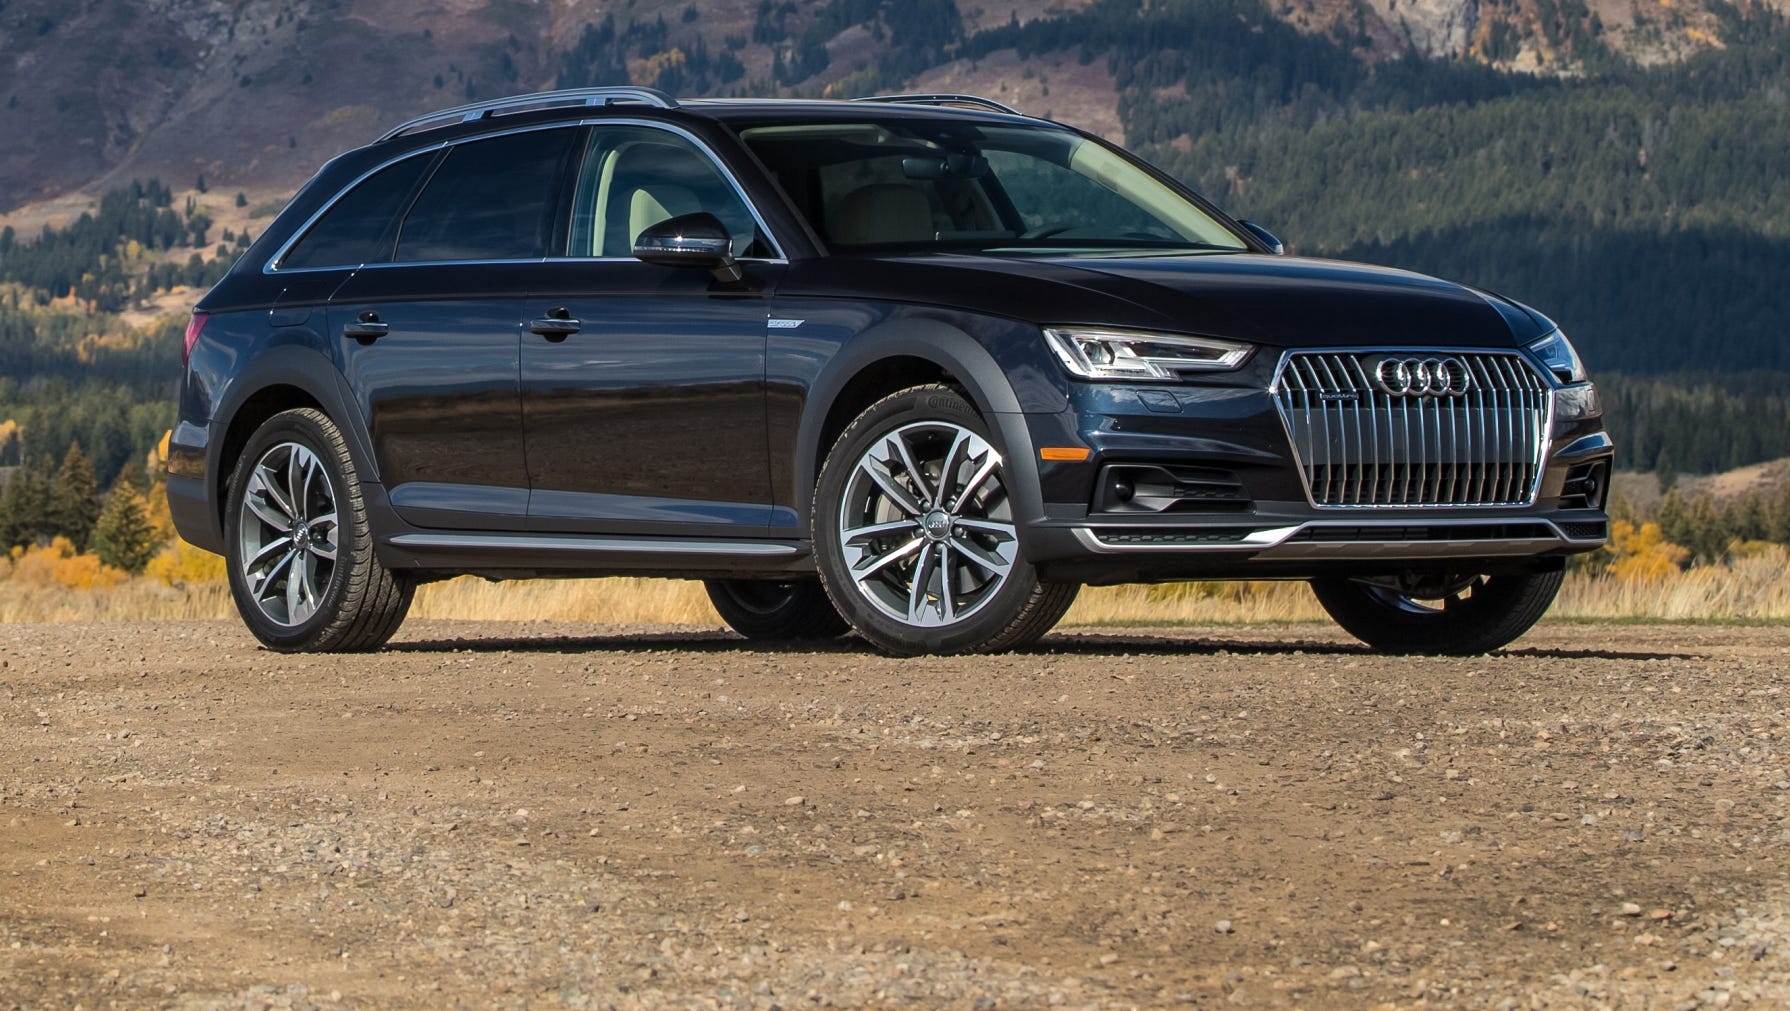 Car Review: Audi's A4 Allroad is ready for any road